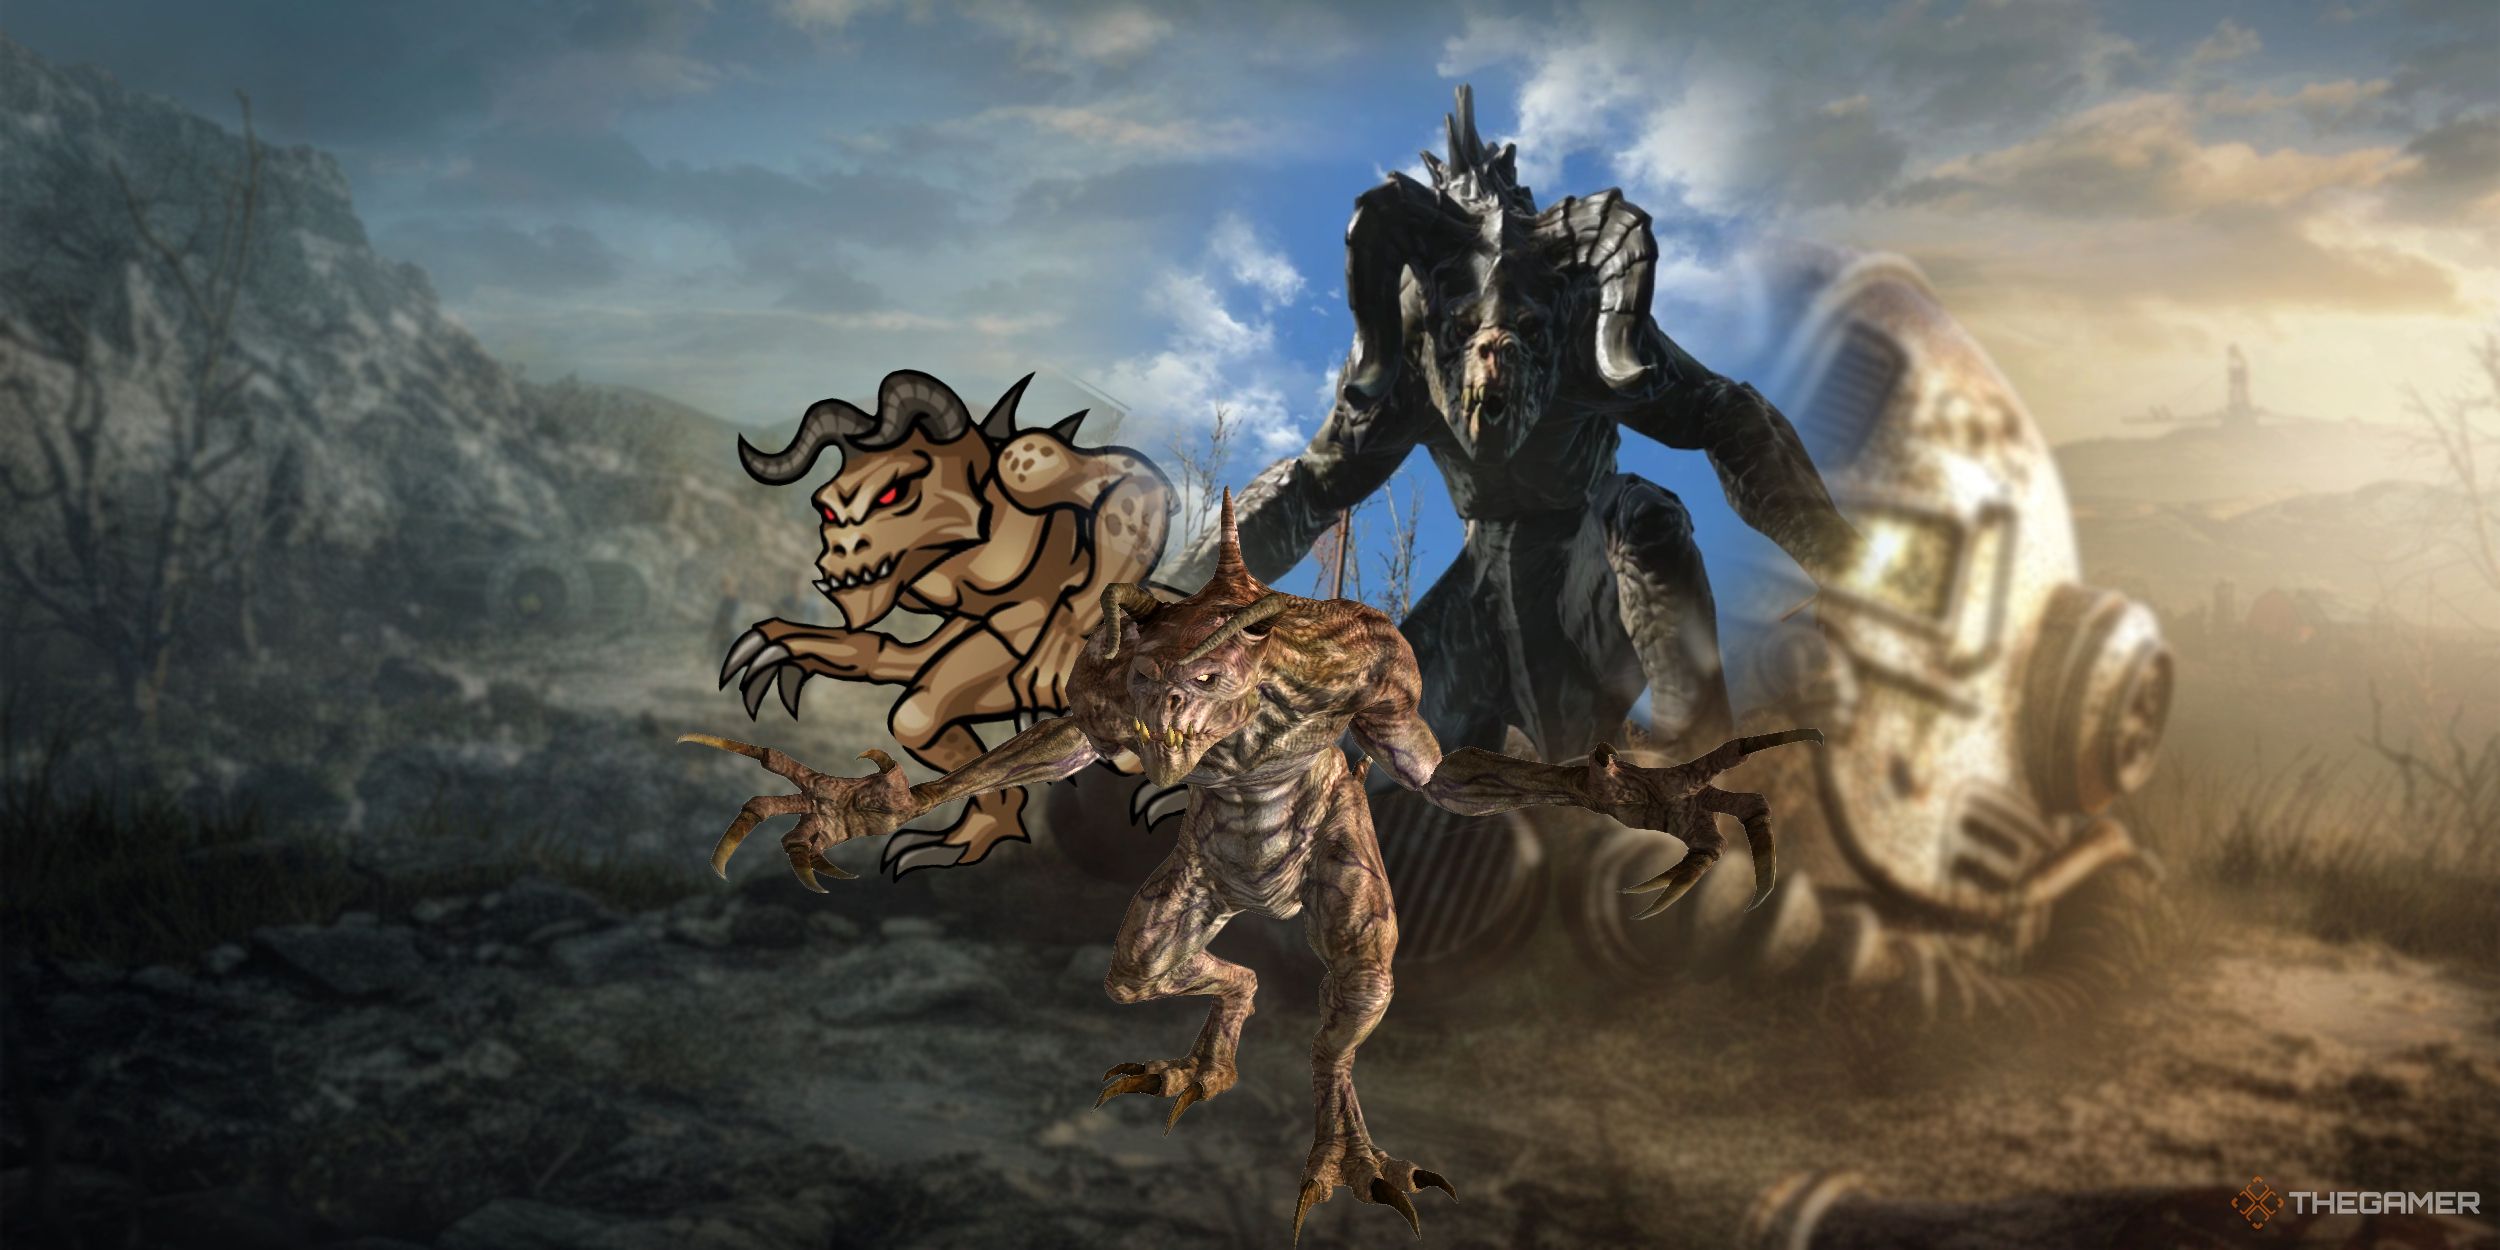 An image from the Fallout franchise that showcases three of the various deathclaw designs from Fallout Shelter, Fallout 3, and Fallout 4.